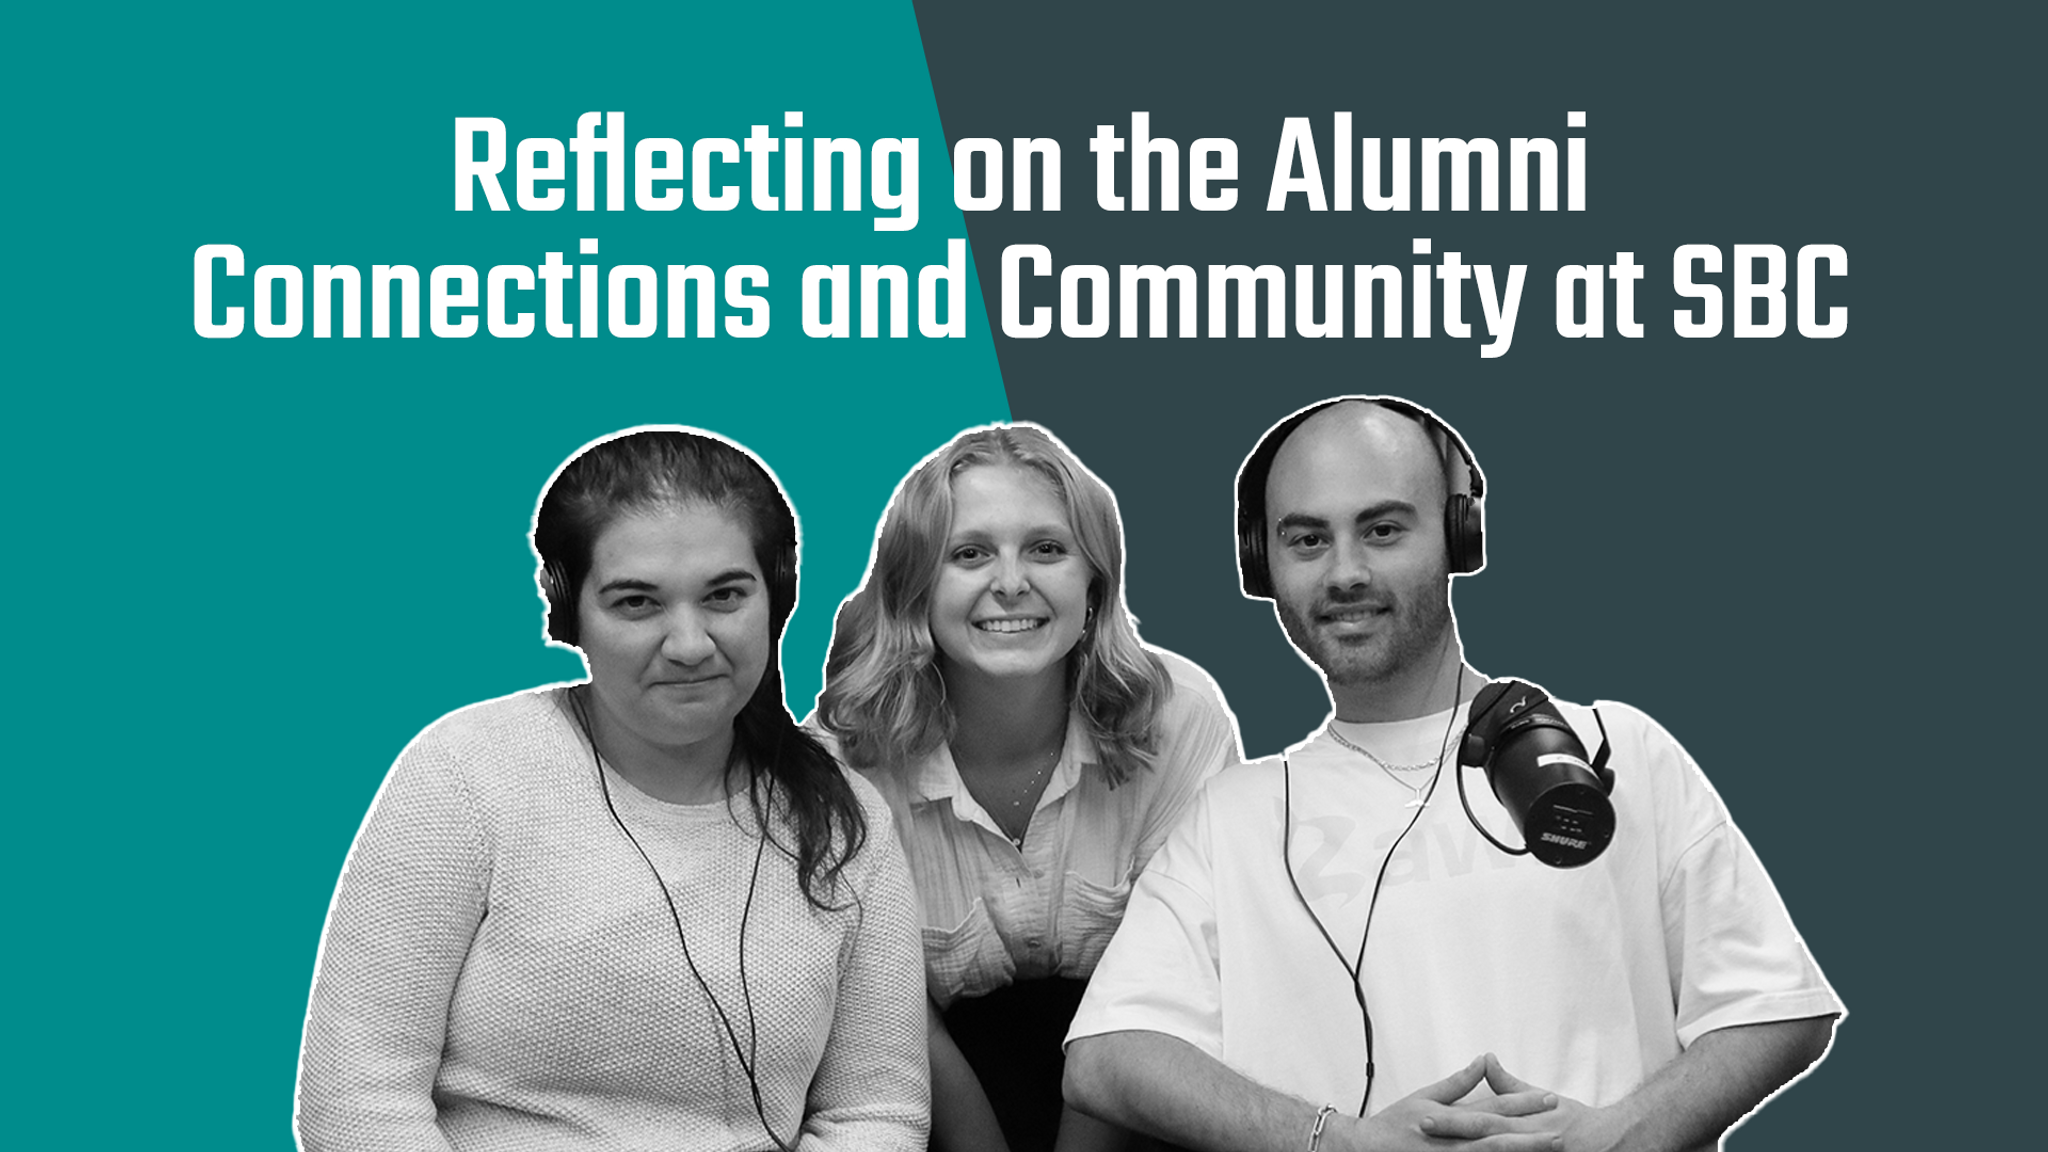 Reflecting on the Alumni Connections and Community at SBC